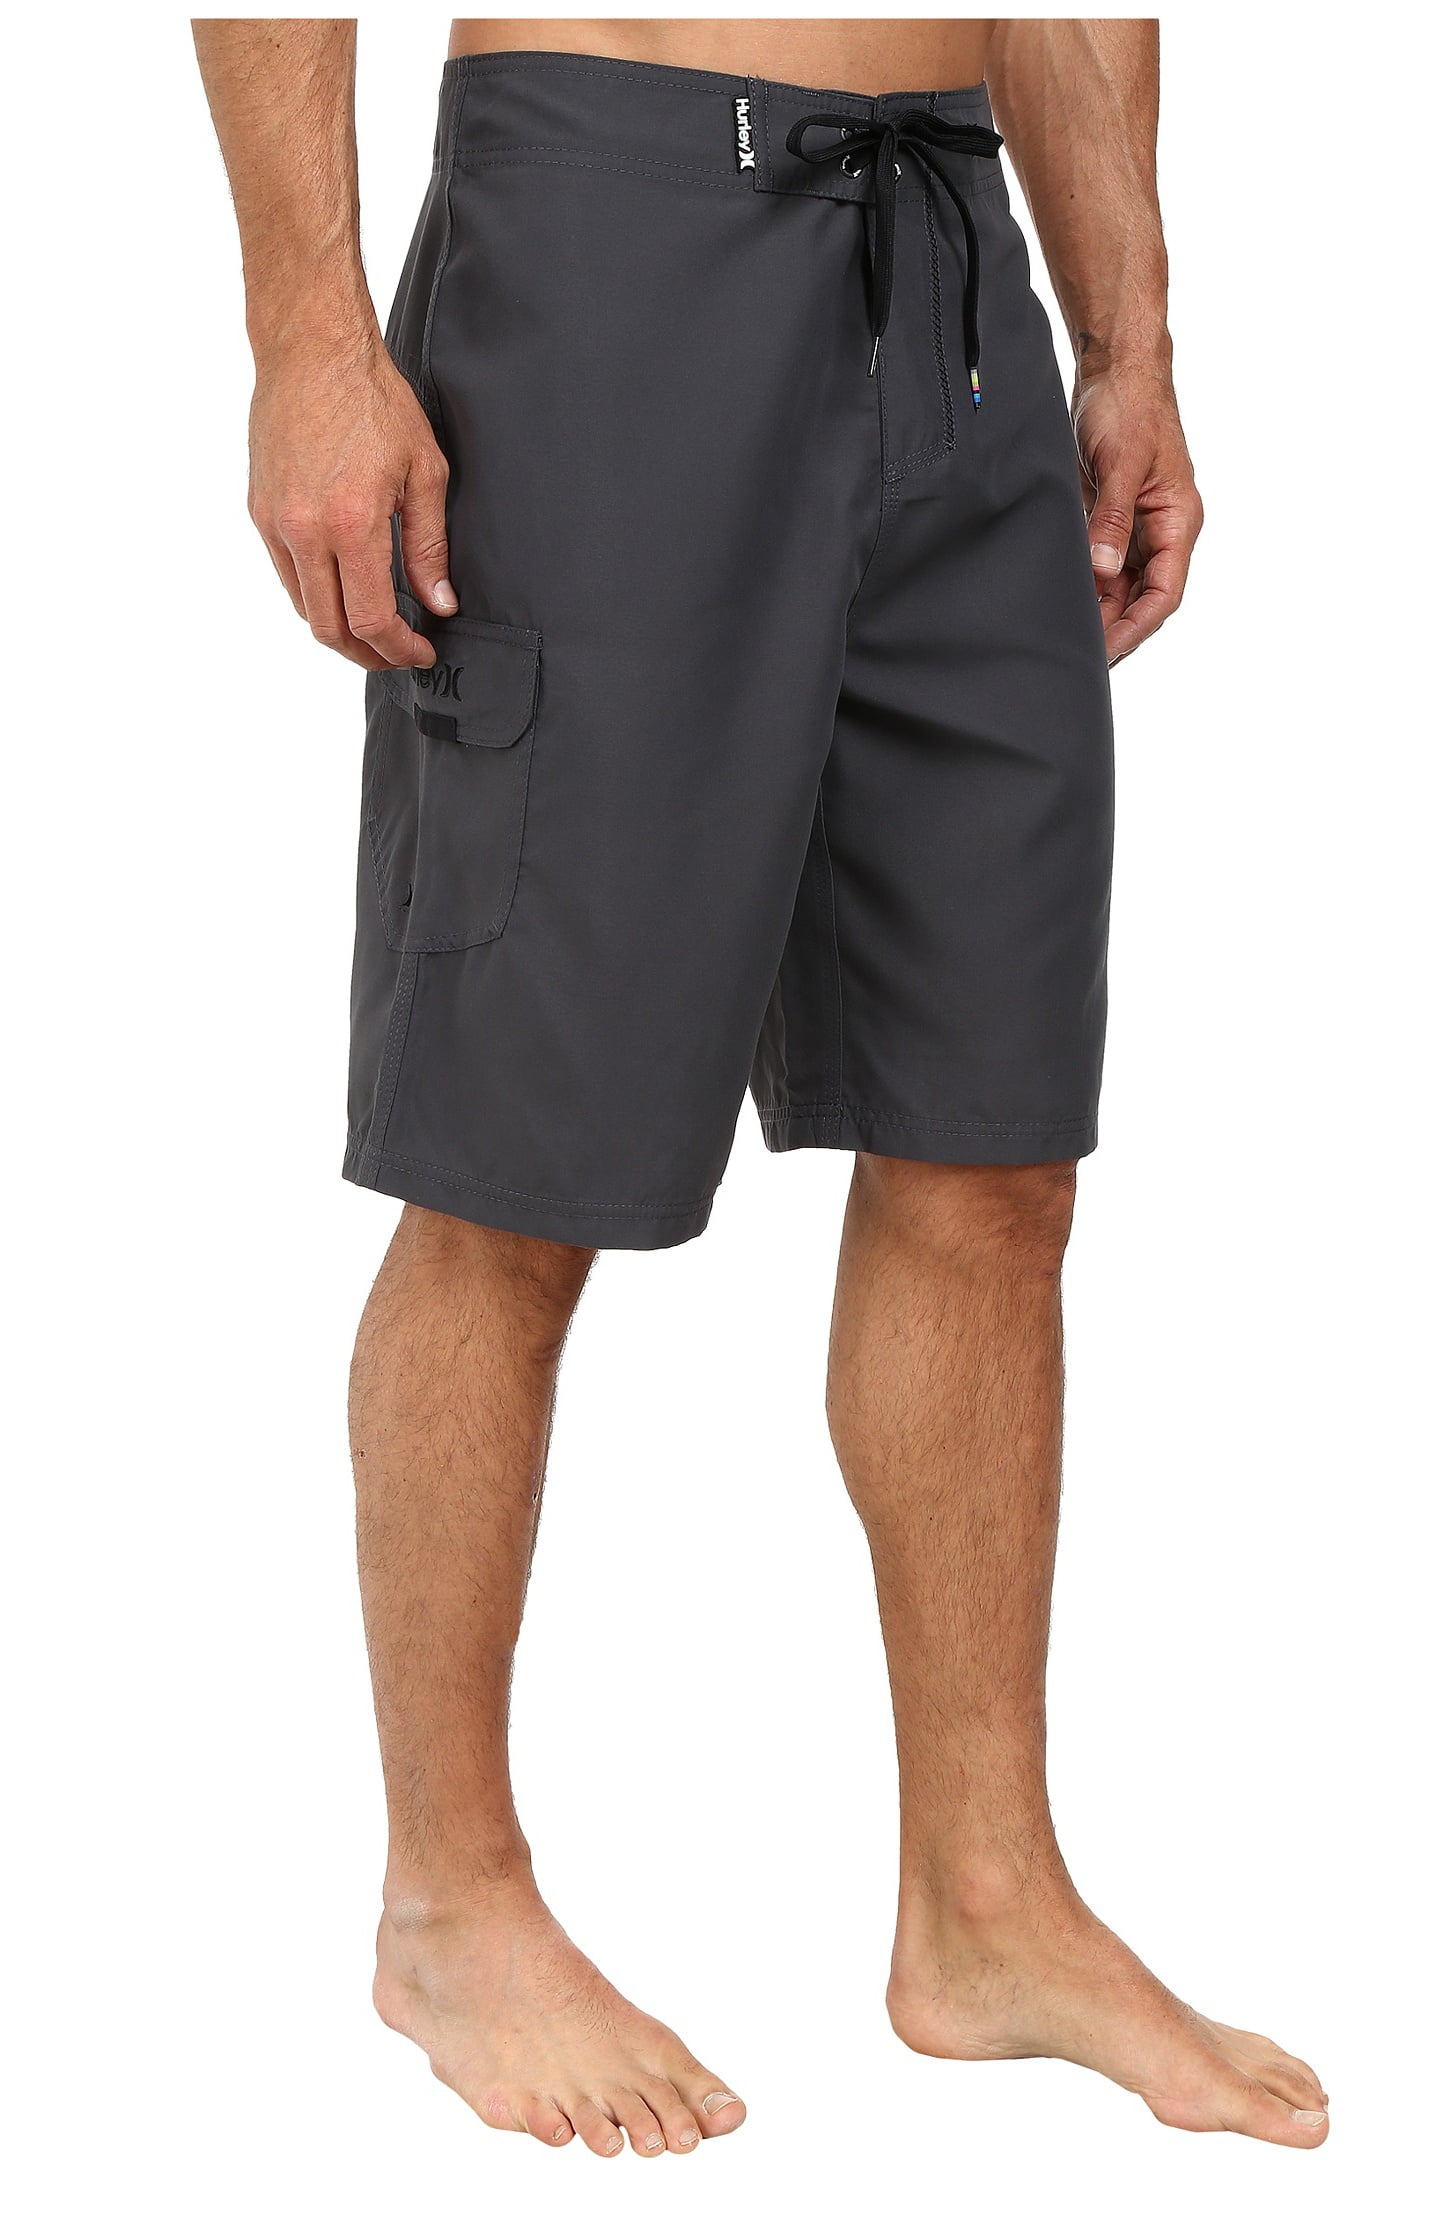 Hurley Men's One and Only Logo Board Shorts Grey - Walmart.com